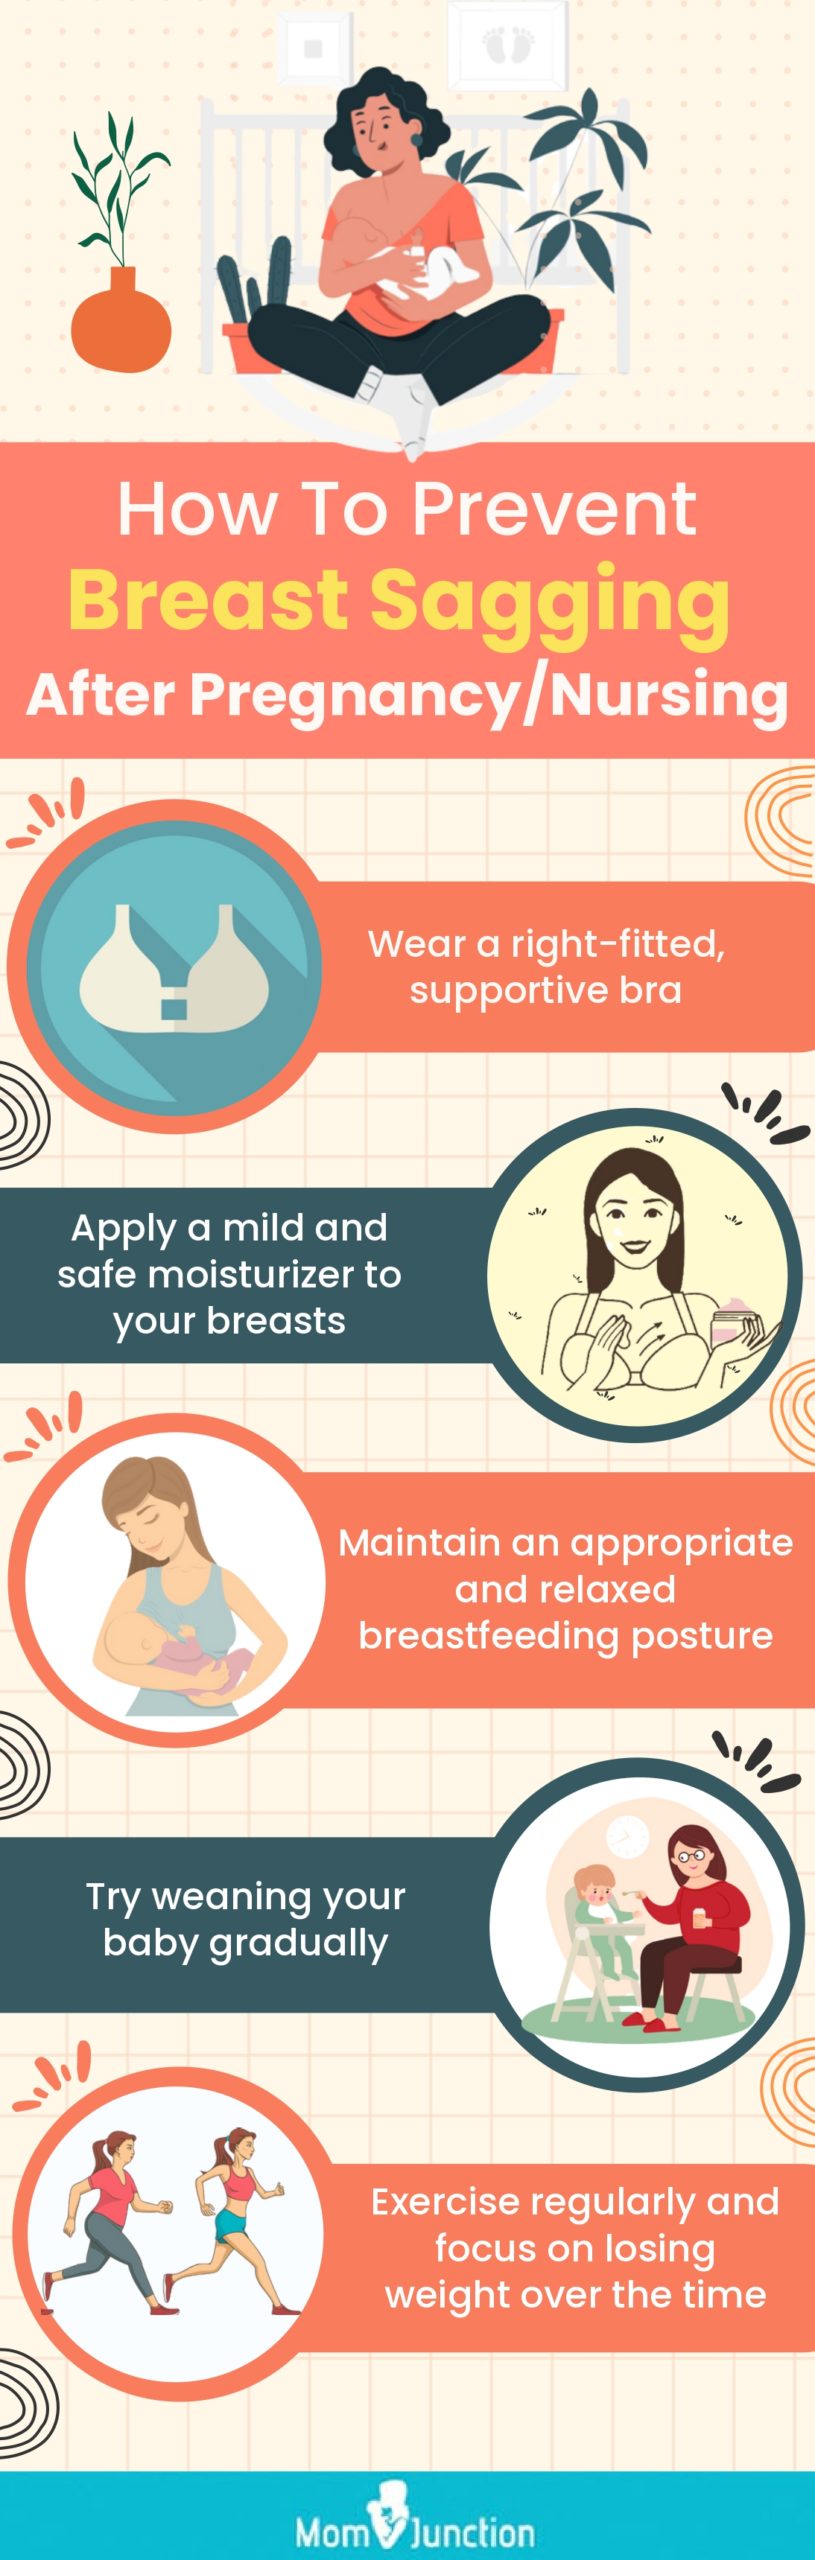 How To Lift Sagging Breasts From Breastfeeding - Lift Saggy